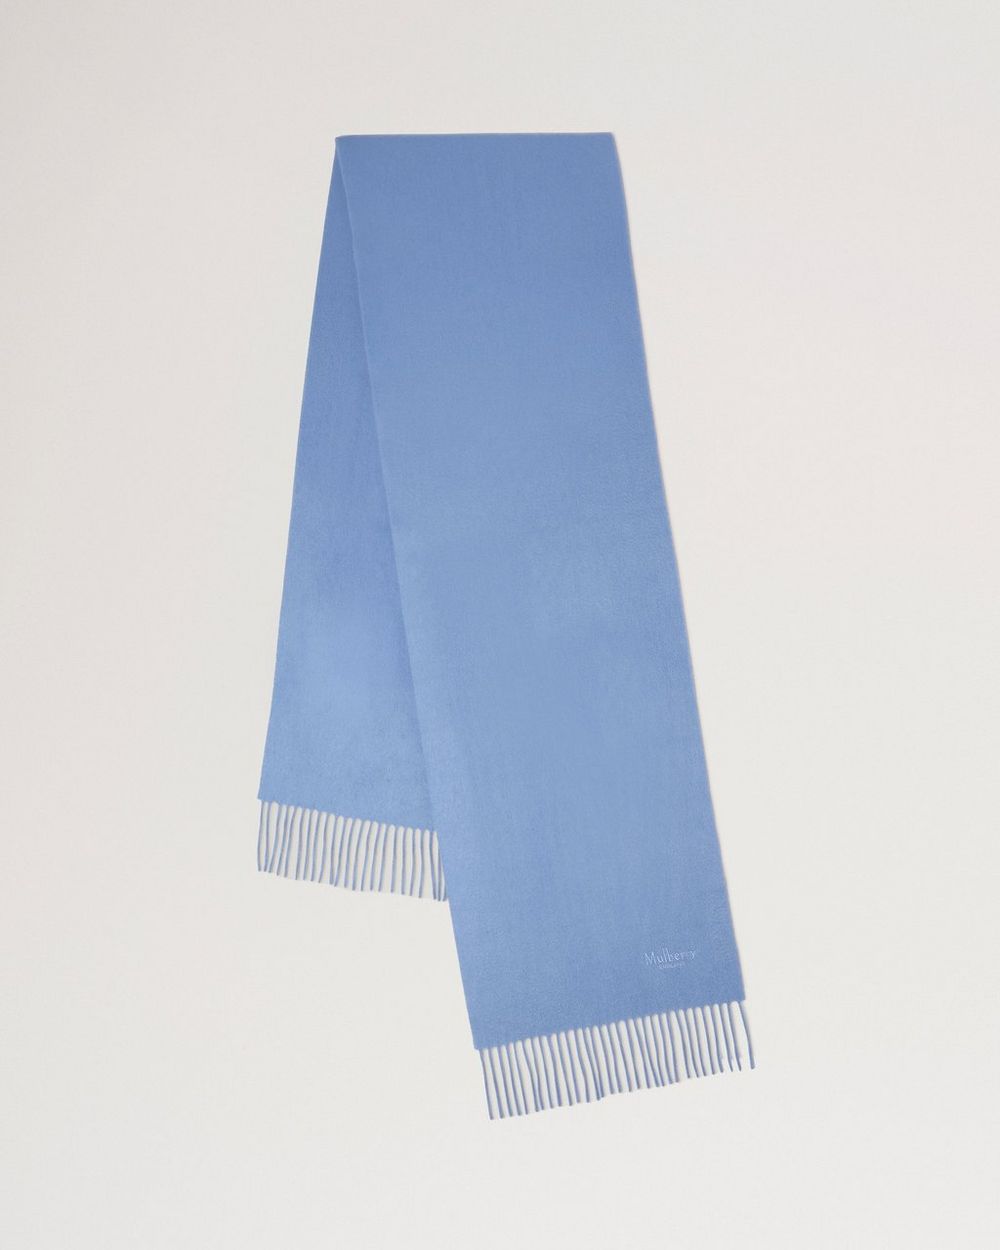 Buy Authentic Navy Blue Cashmere Scarf